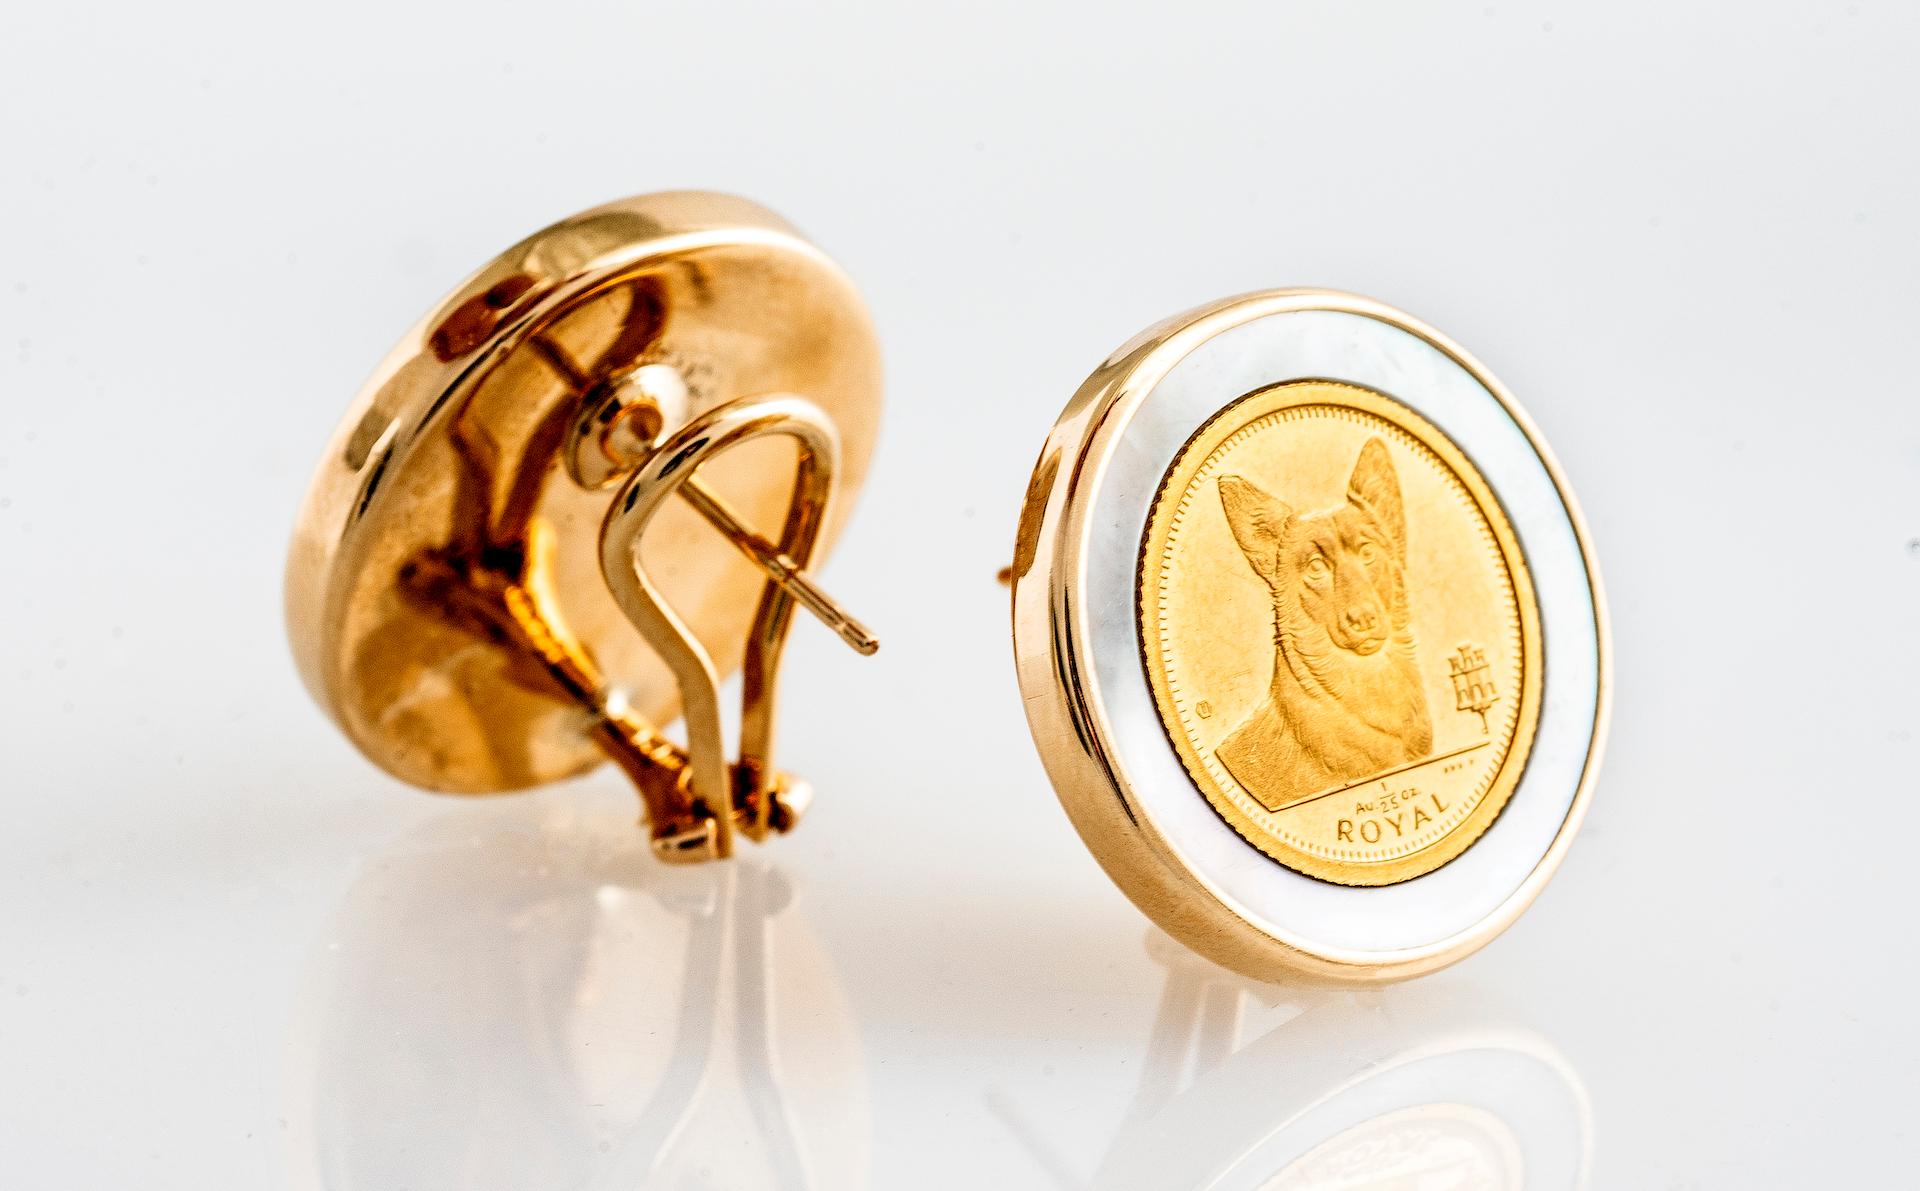 Vintage 14k yellow gold round button mother of pearl earrings with 24k gold Corgi dog coins.  Royal Gibraltar Pembroke Welsh Corgi gold coins are 24k and weigh 1/25 ounces each.  Earrings are lever back and are 20mm in width.  